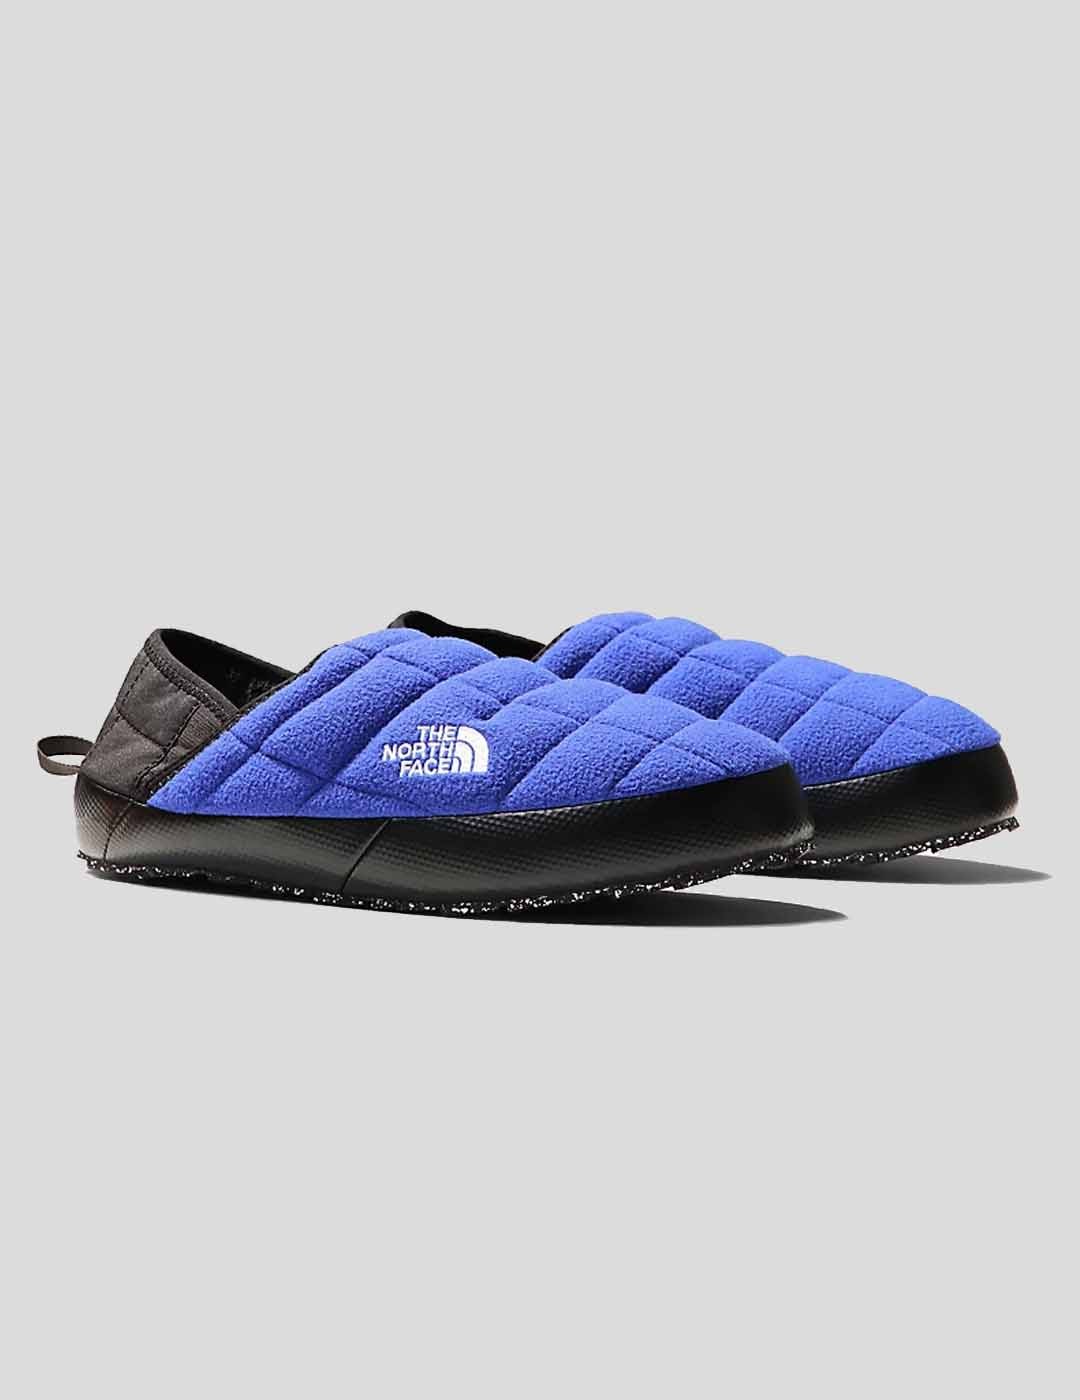 ZAPATILLAS THE NORTH FACE THERMOBALL TRACTION MULE V DENALI LAPIS BLUE/TNF BLACK